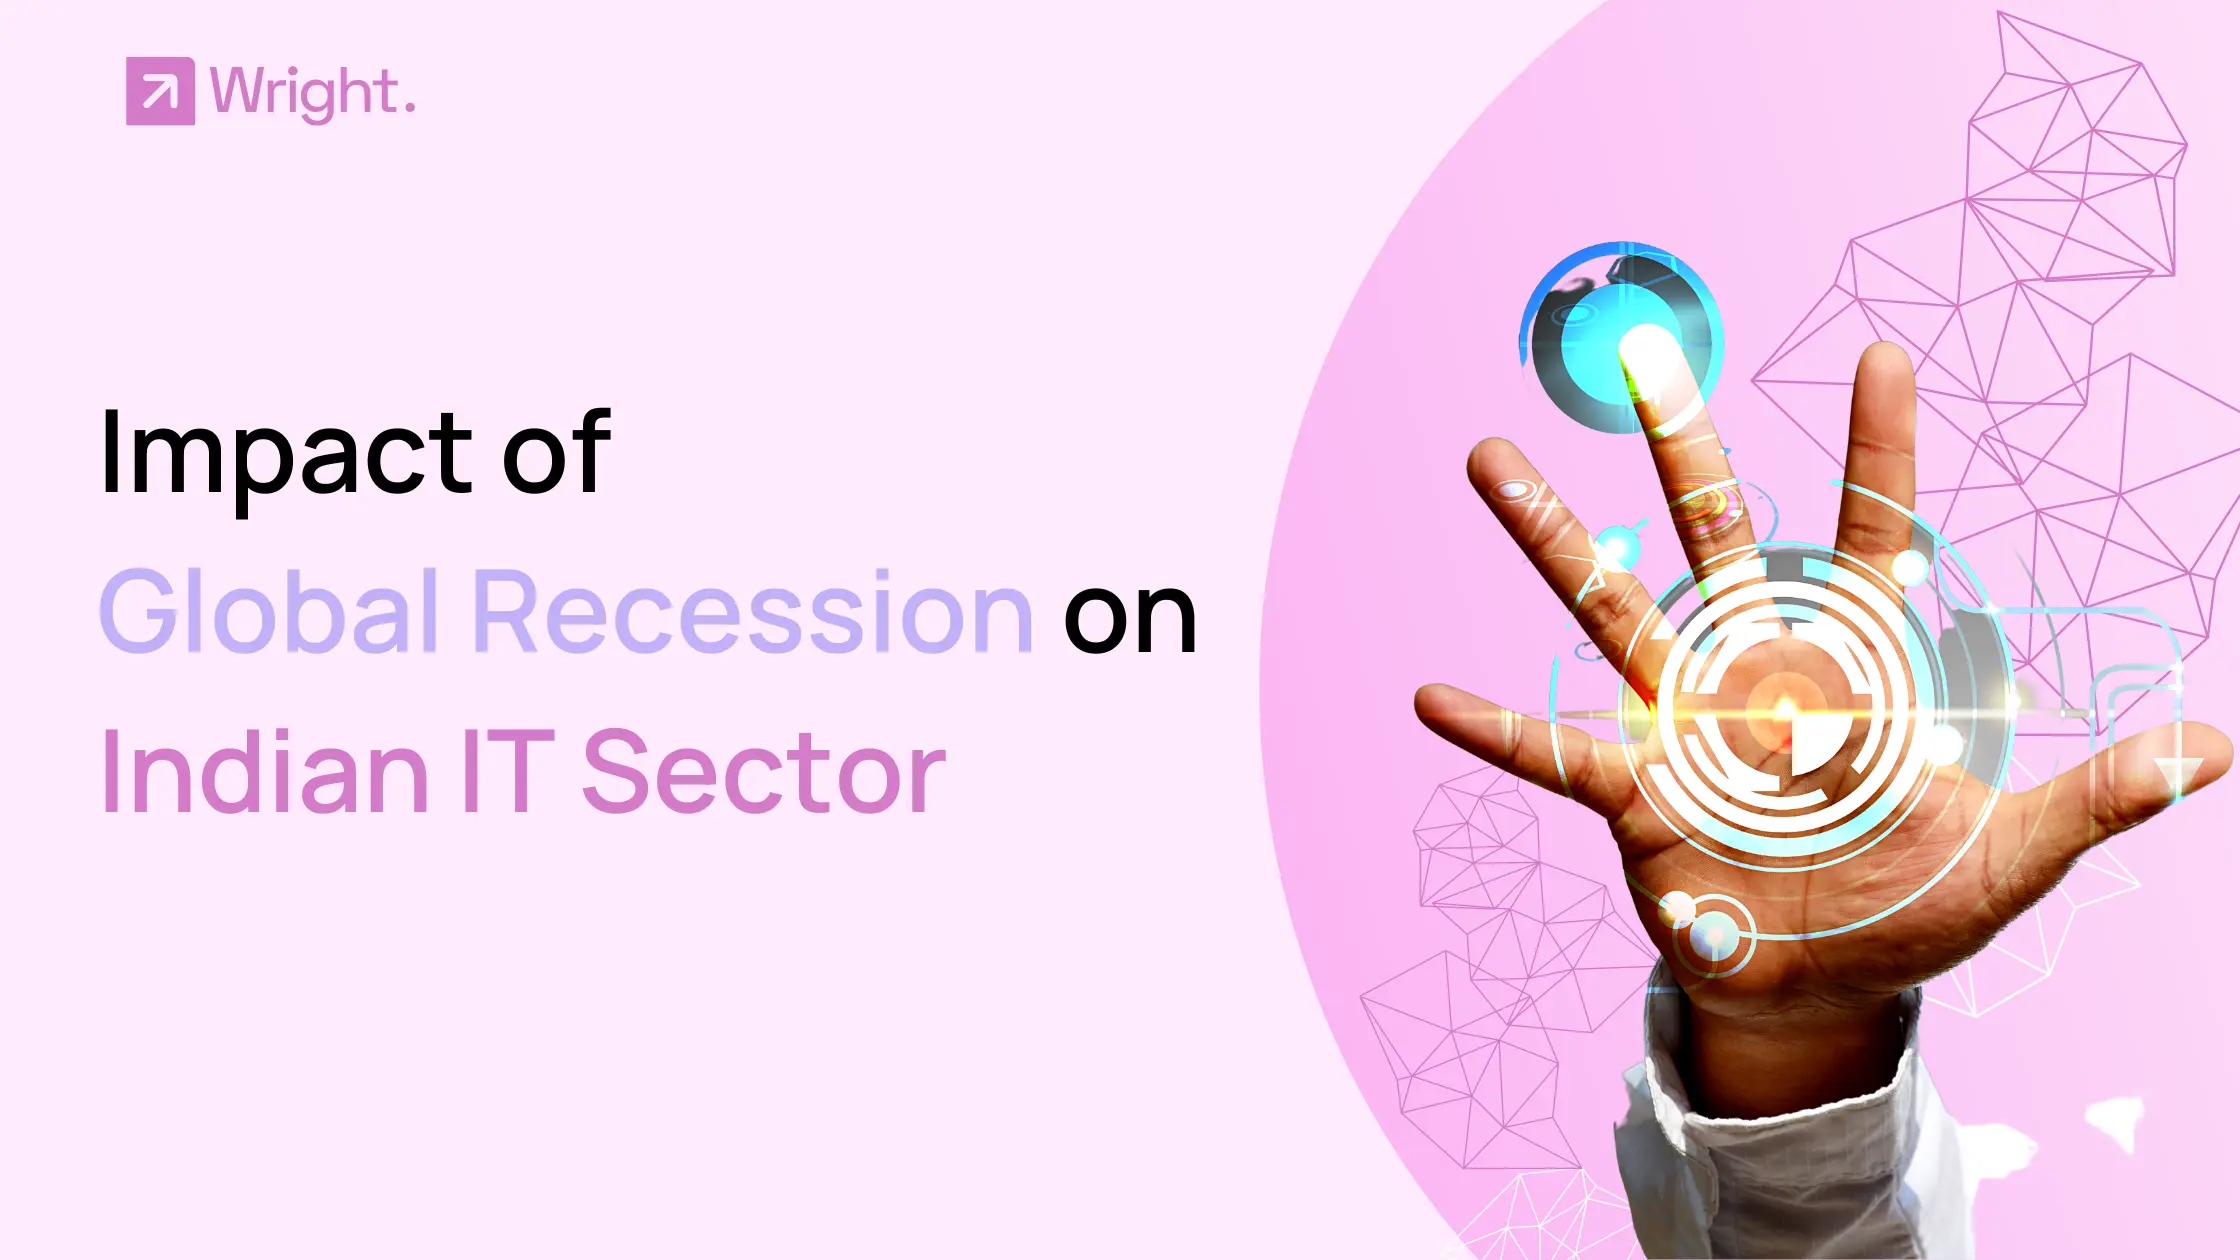 Impact of Global Recession on Indian IT sector